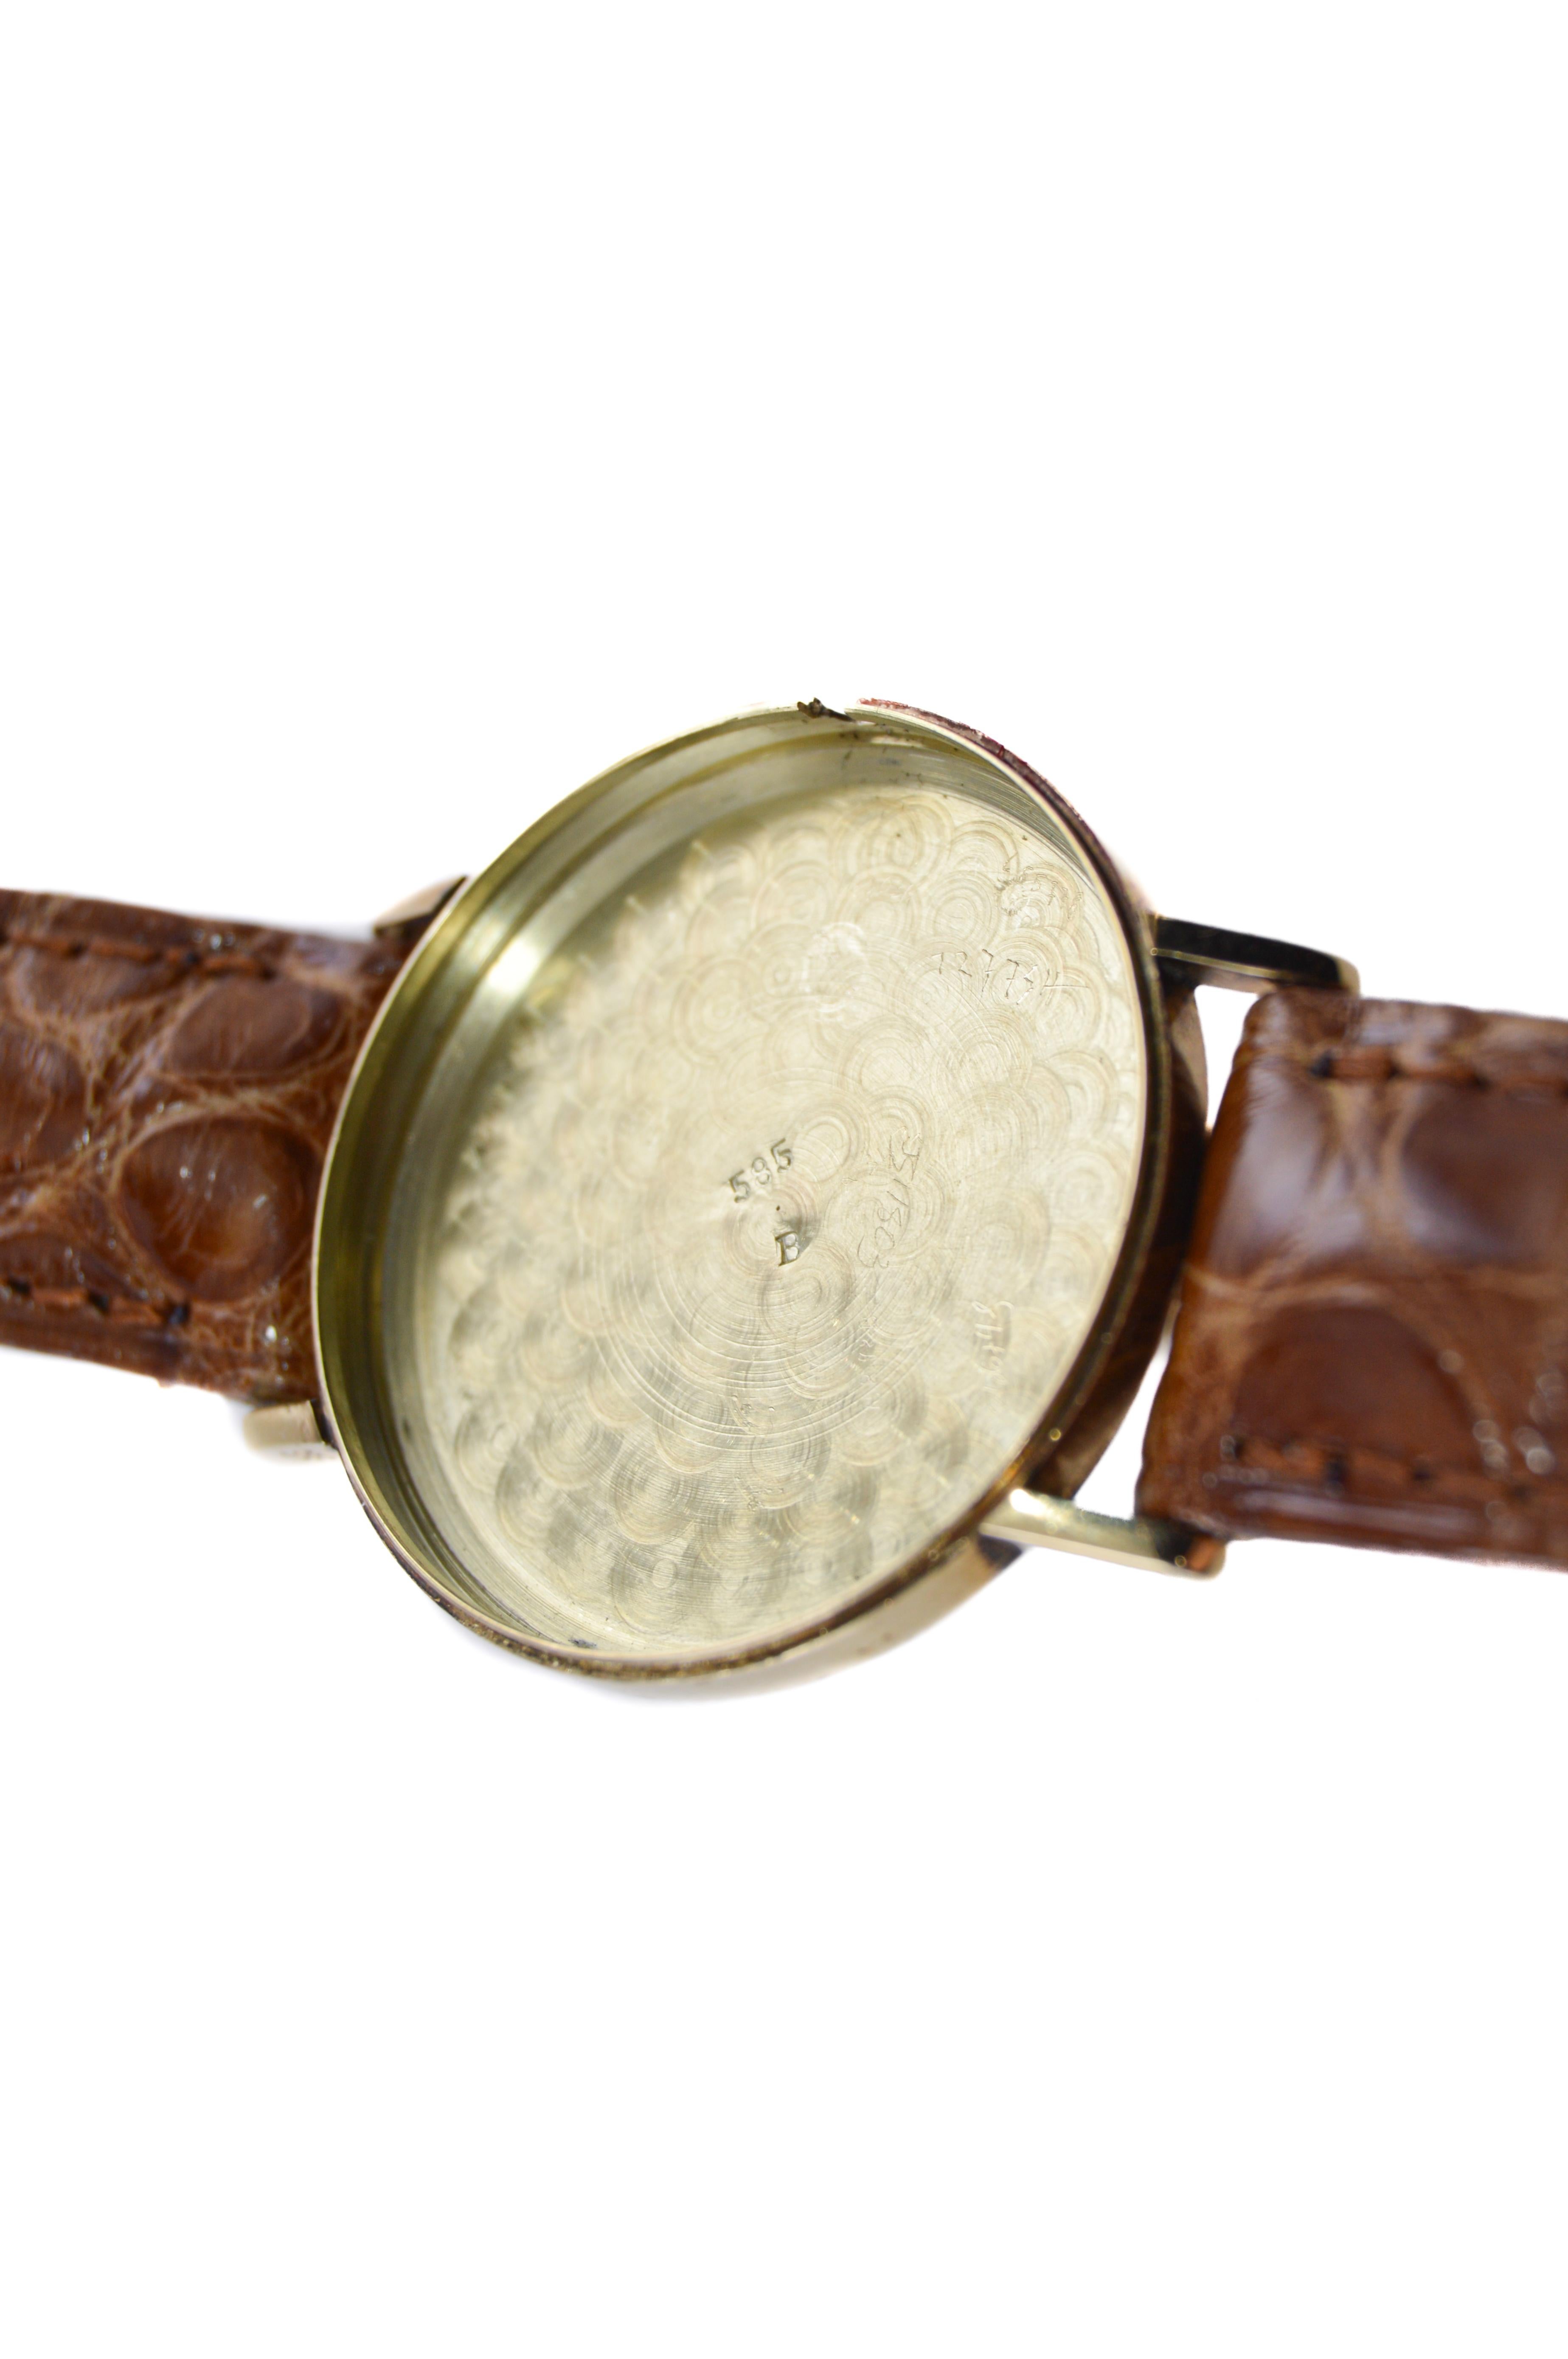 Tiffany & Co. 14 Karat Solid Yellow Gold Vintage Watch, circa 1930s For Sale 5